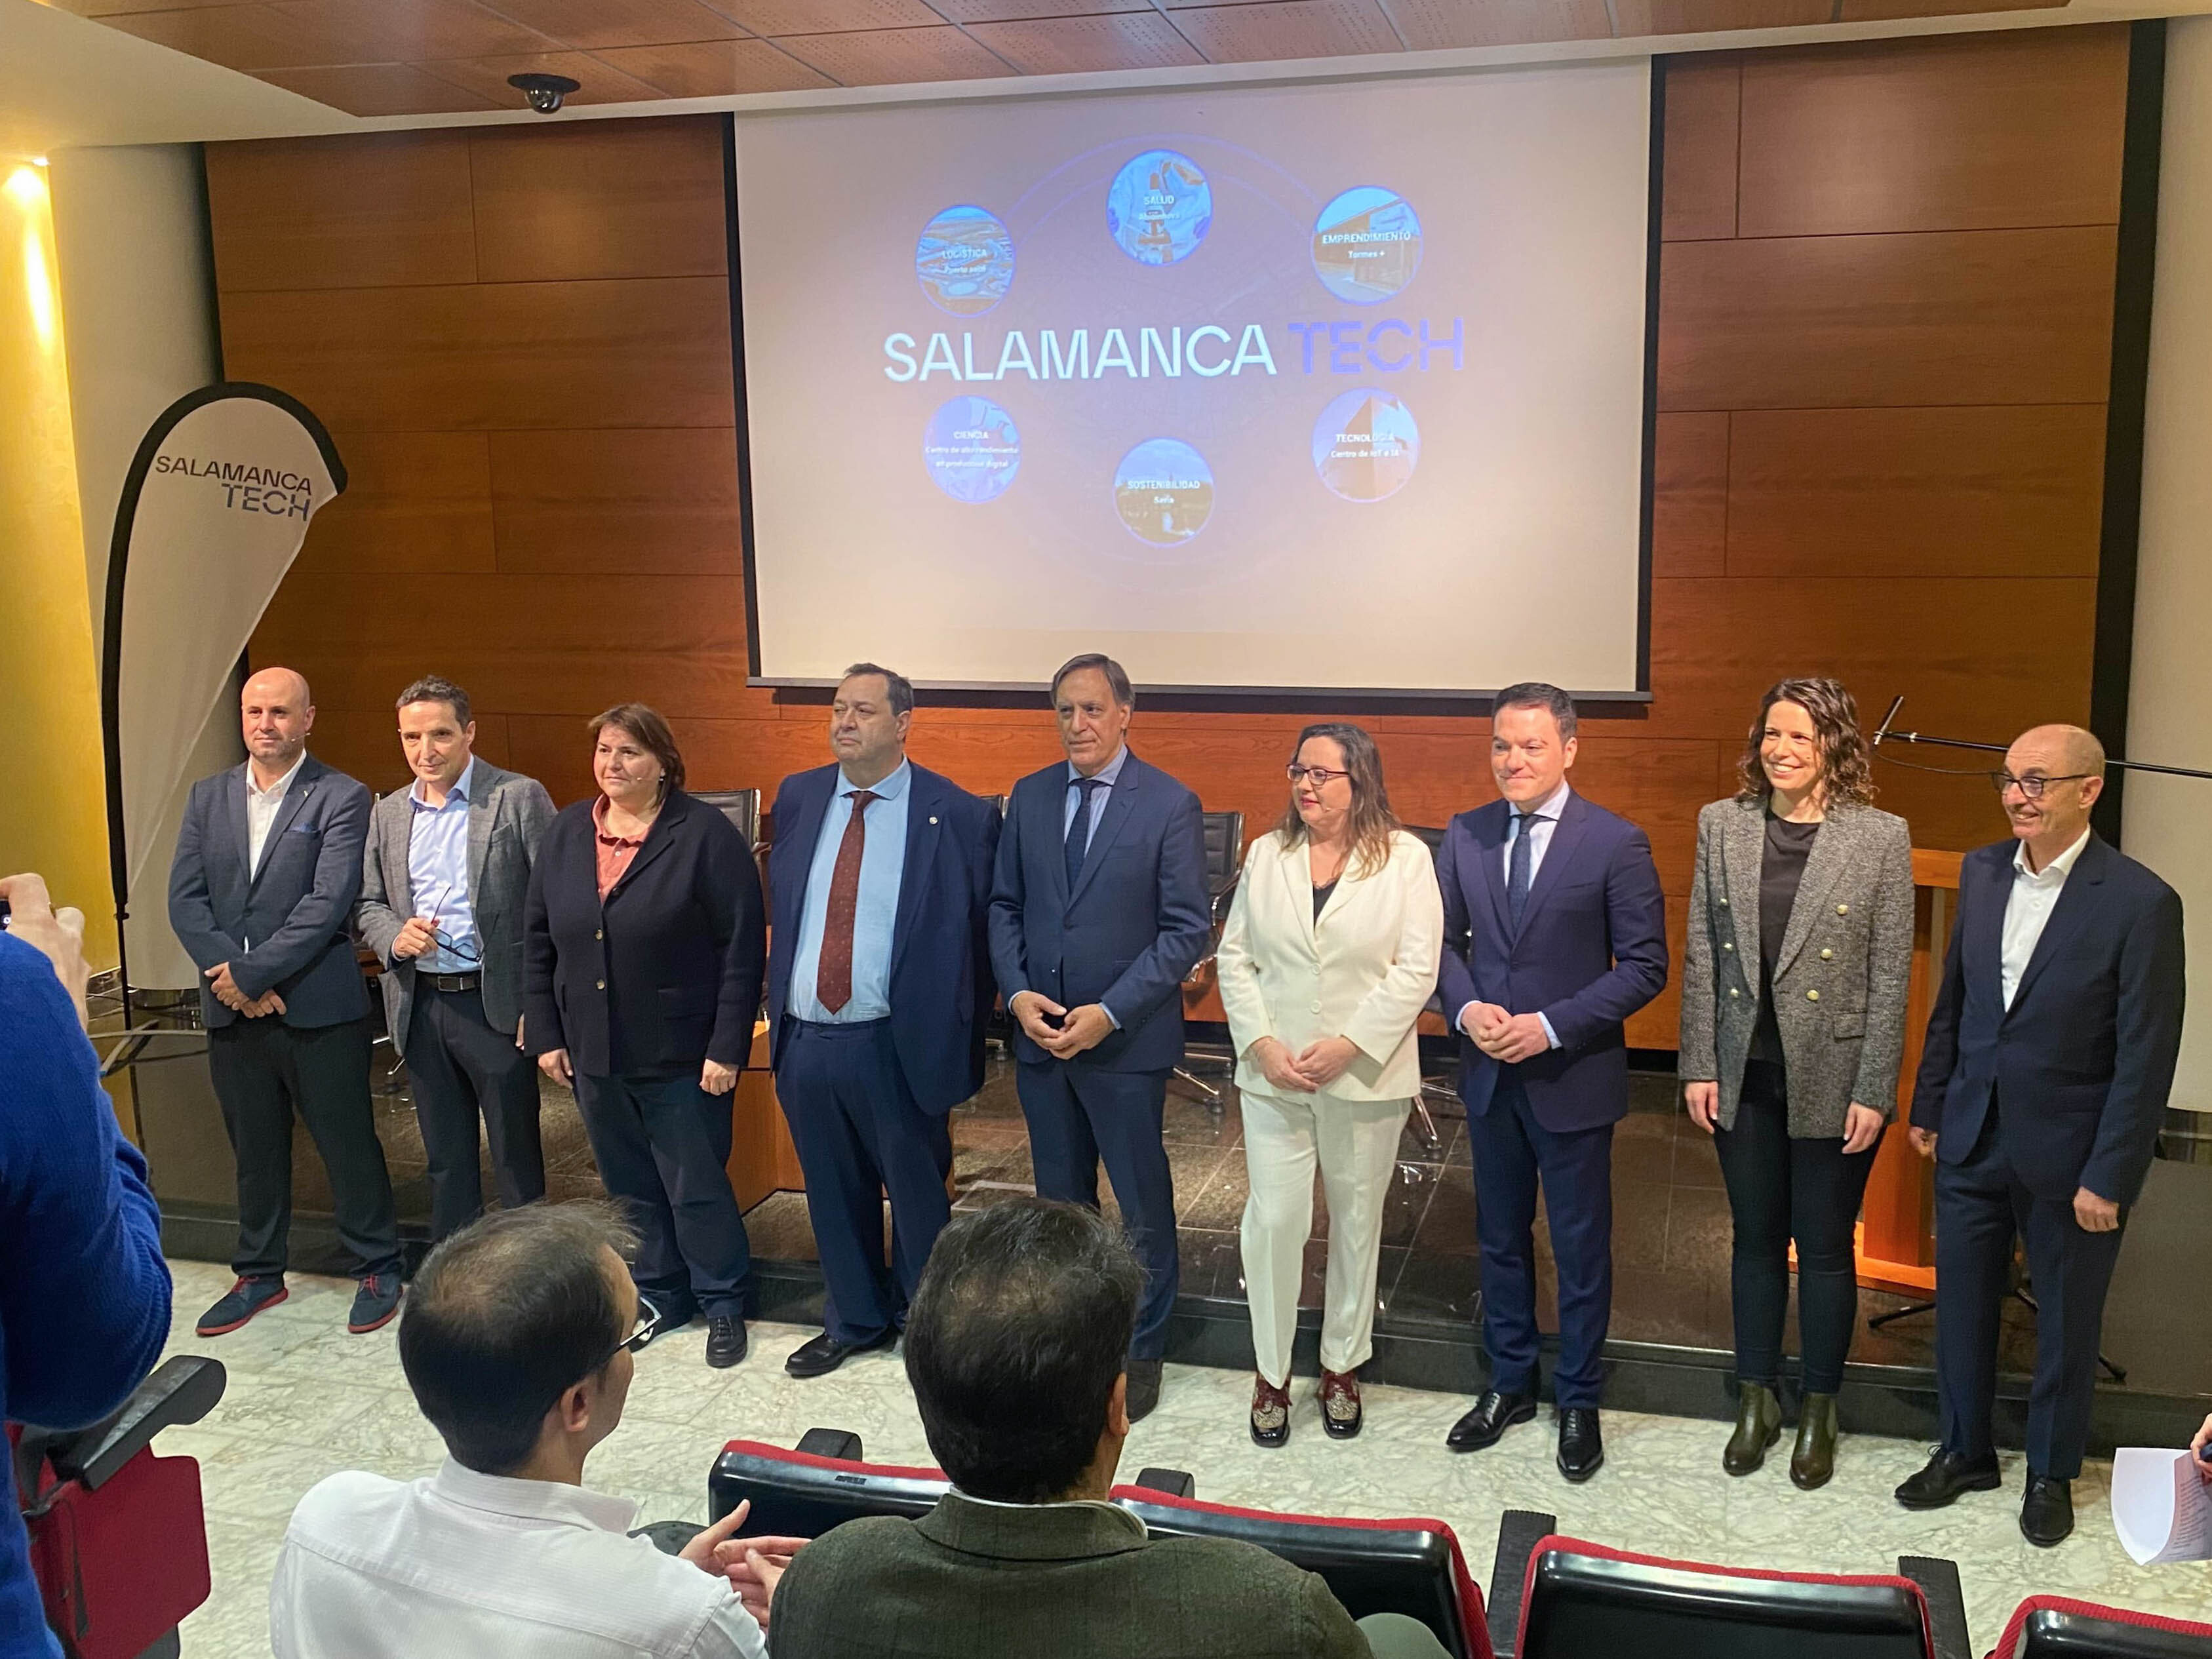 Salamanca Tech showcases business opportunities in the city as a benchmark for biotechnology and innovation in Europe